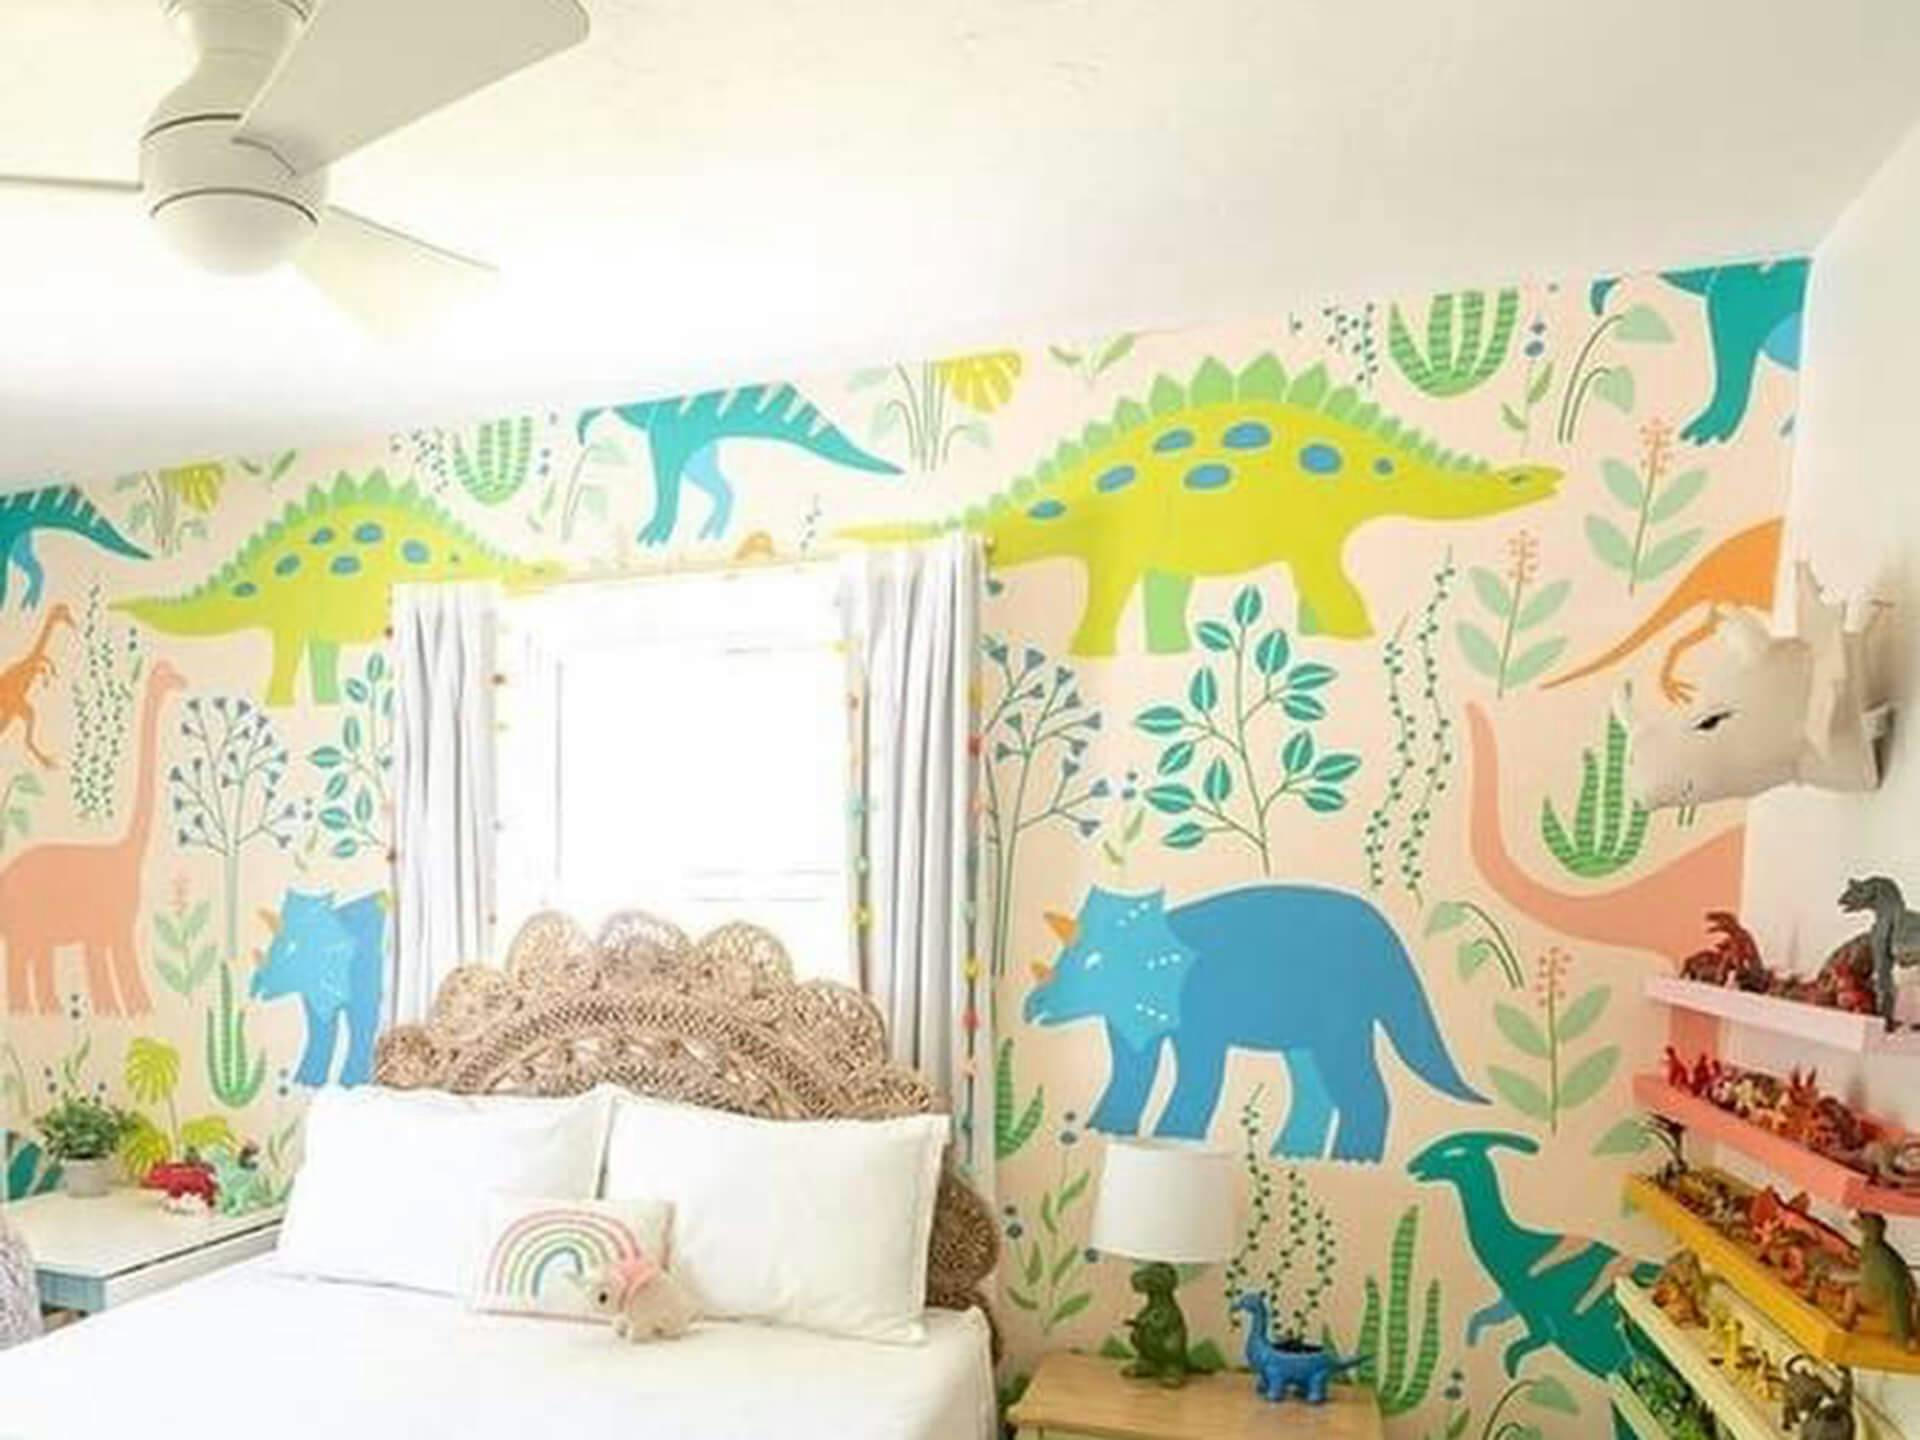 Daylit children's bedroom with cartoon dinosaurs on the wall